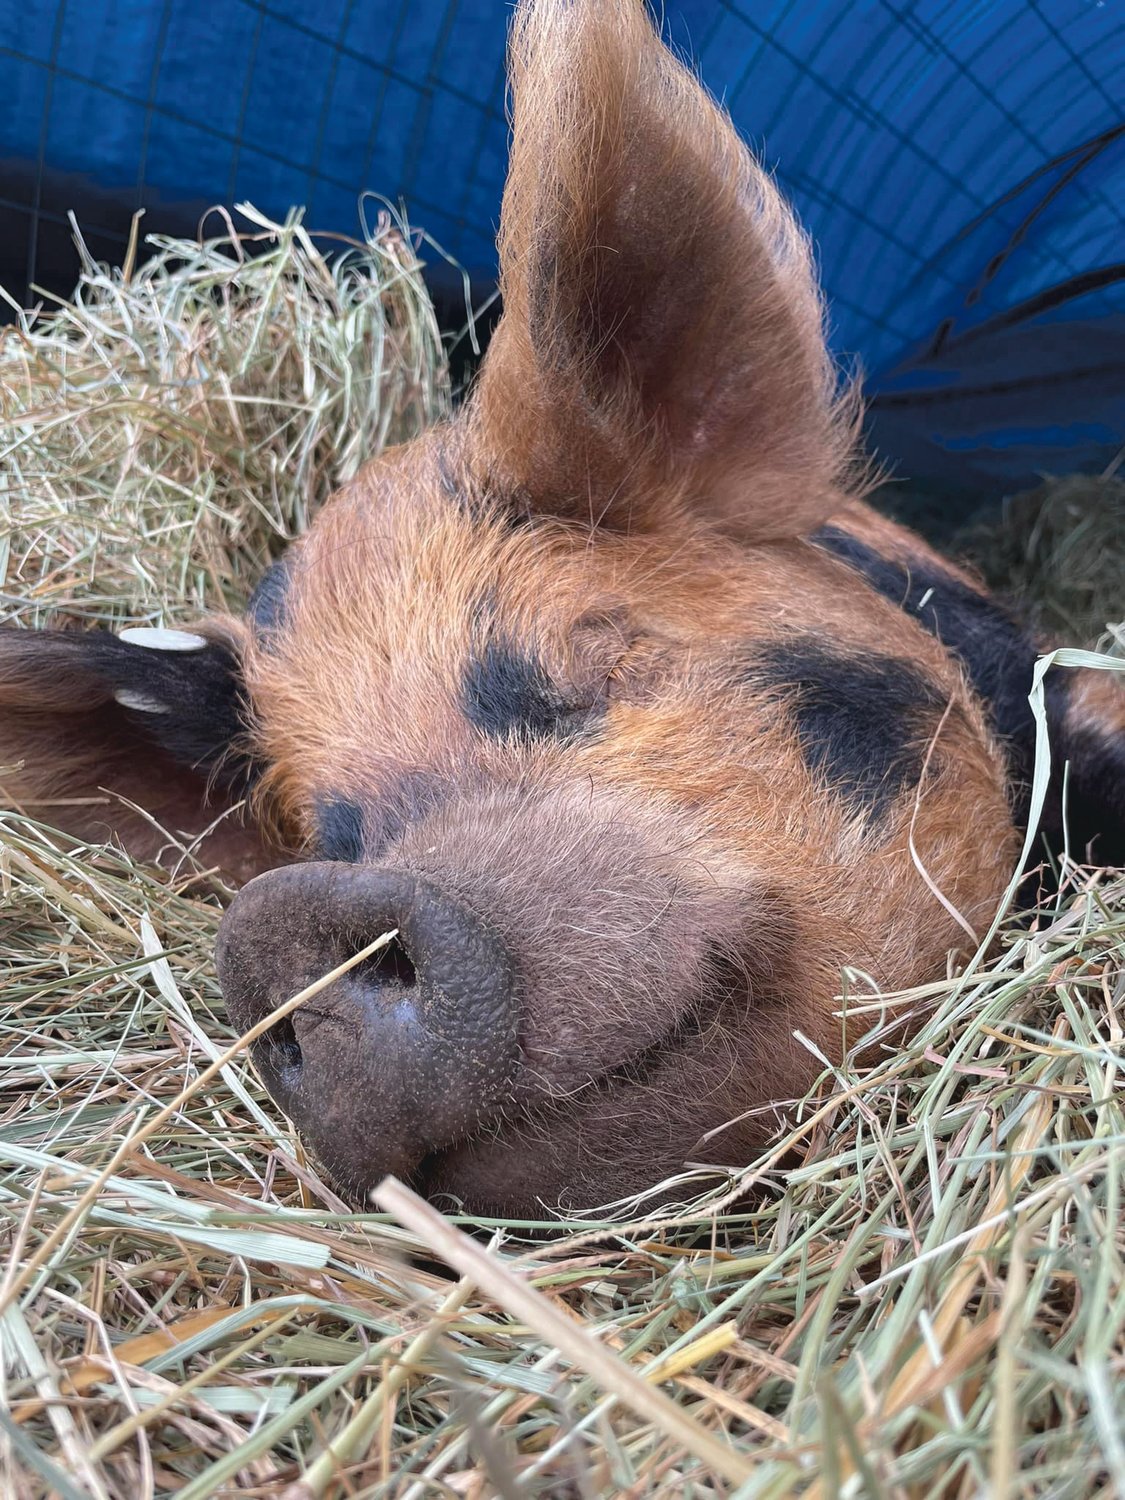 Heartwood Haven, an animal sanctuary in Roy, recently rescued dozens of pigs following an animal cruelty case in Oregon.